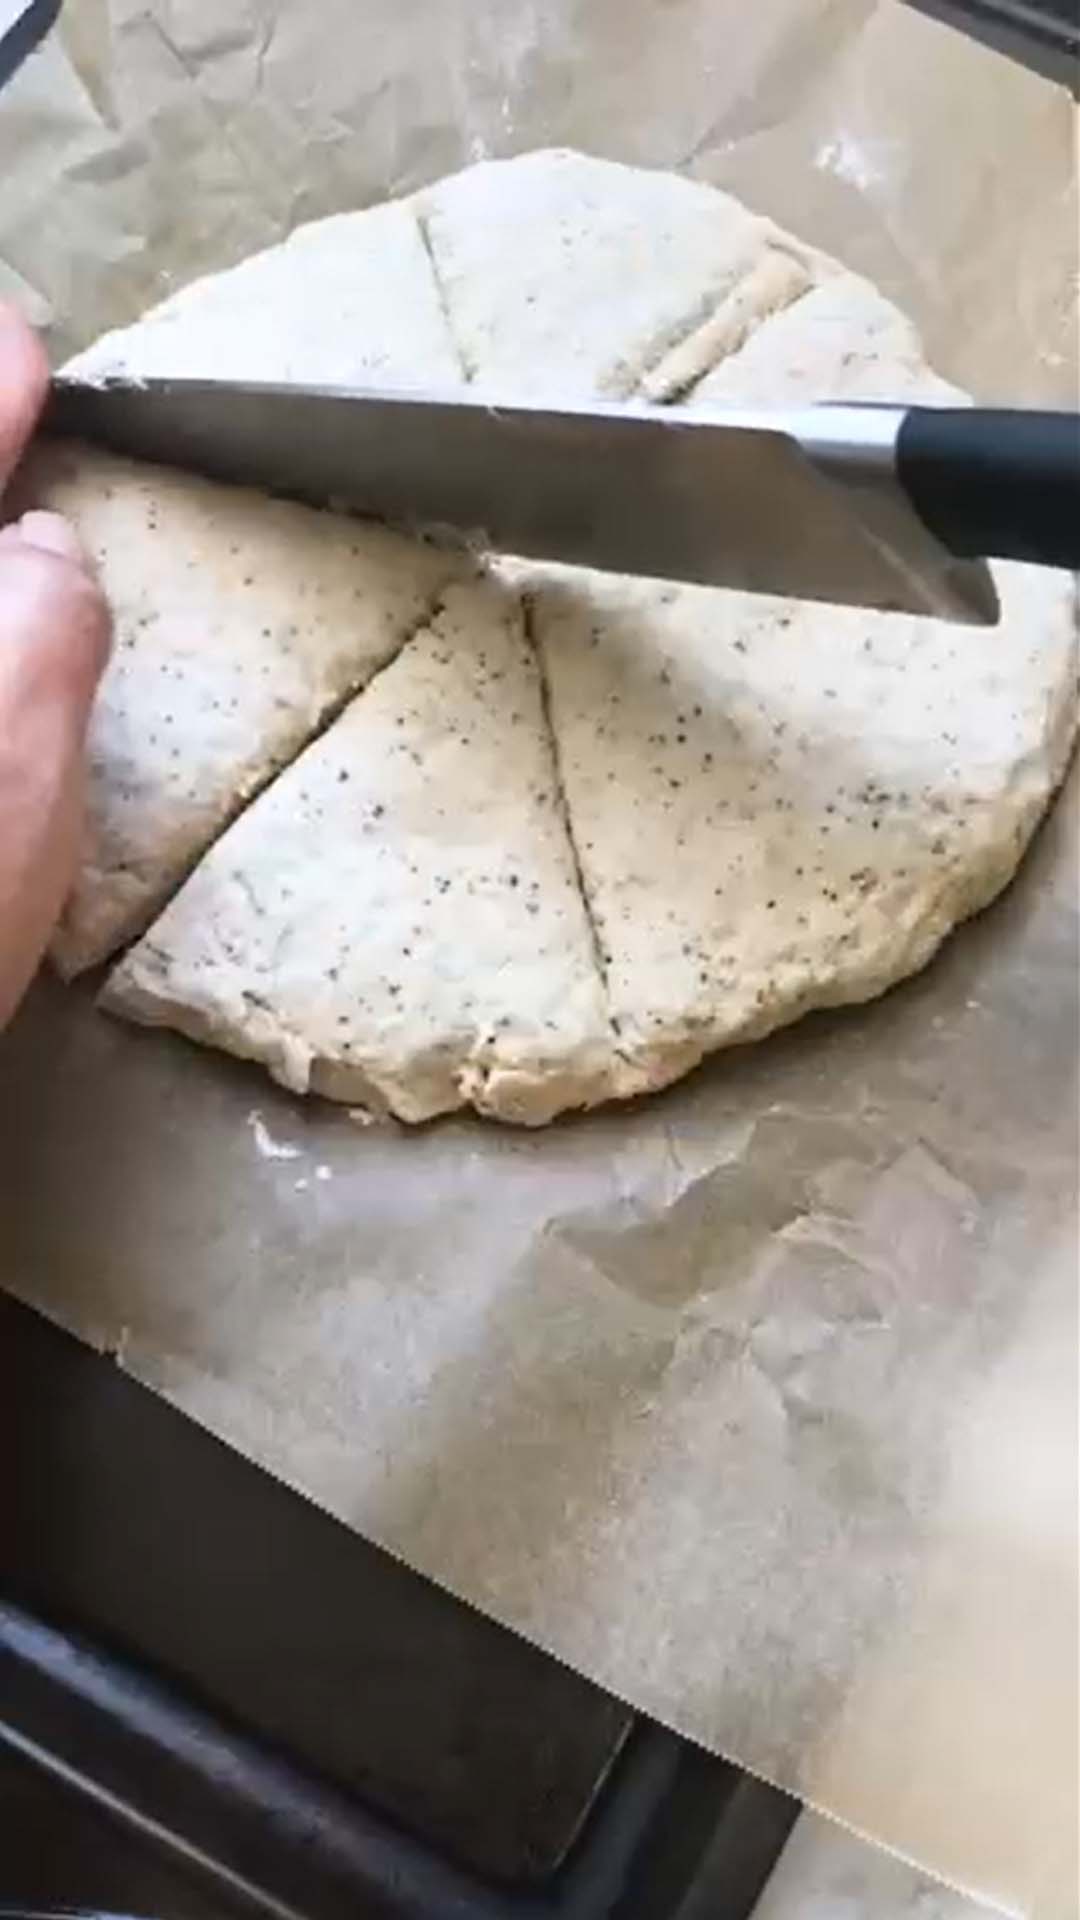 Cutting scone dough into 6 pie slices to bake.